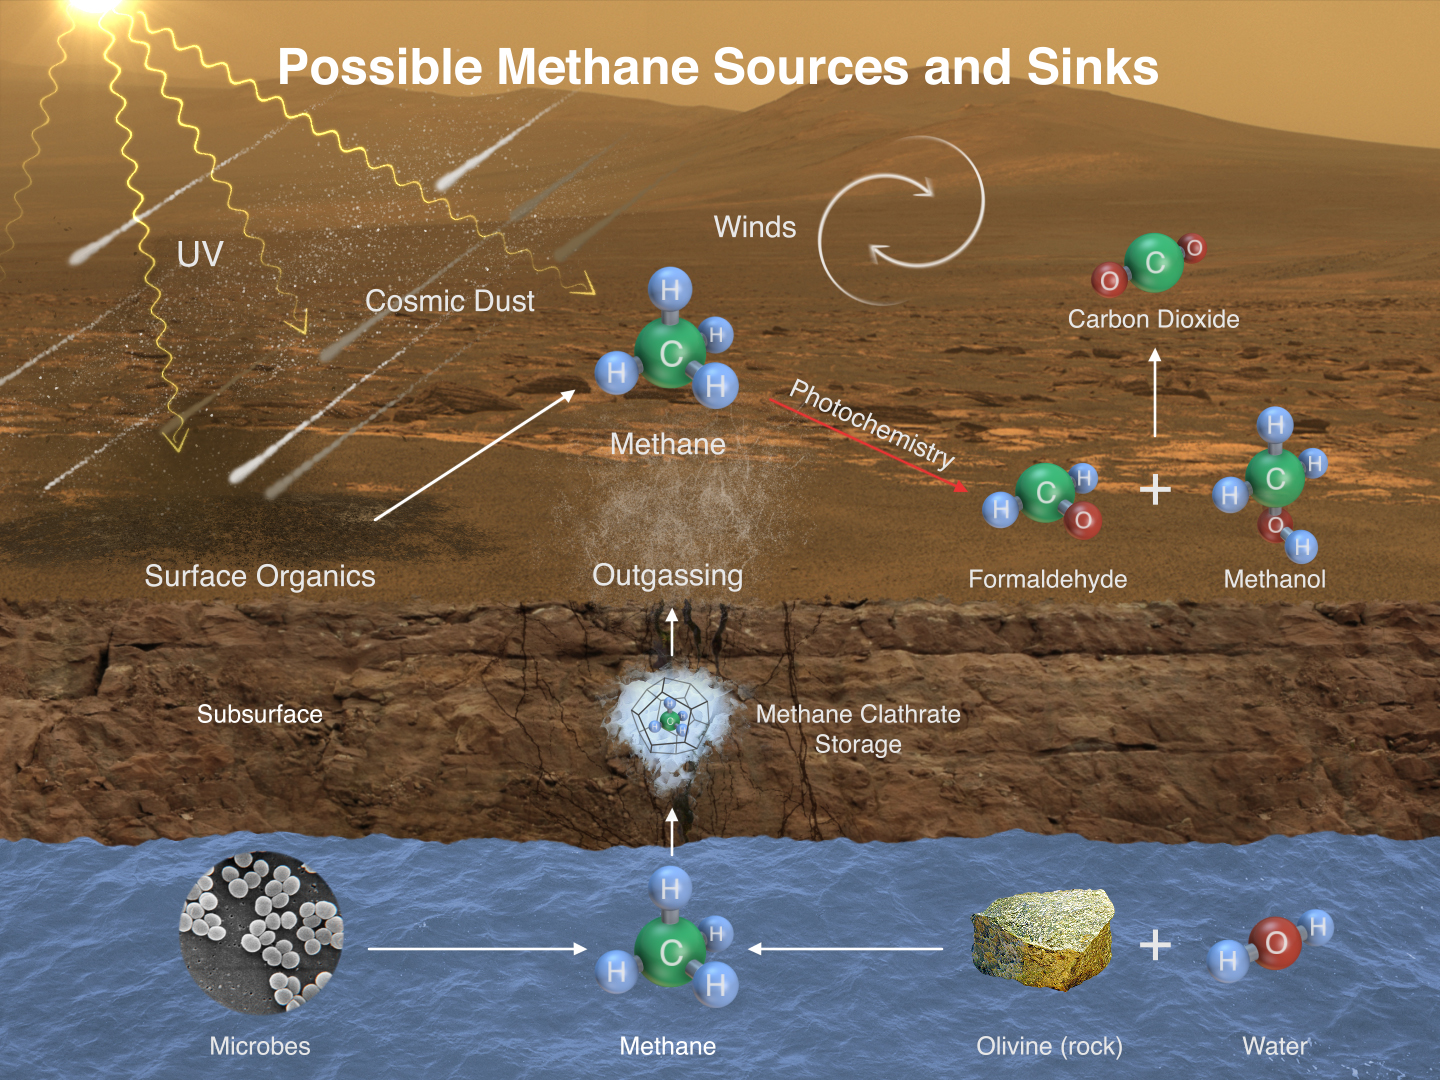 Possible Methane Sources and Sinks infographic